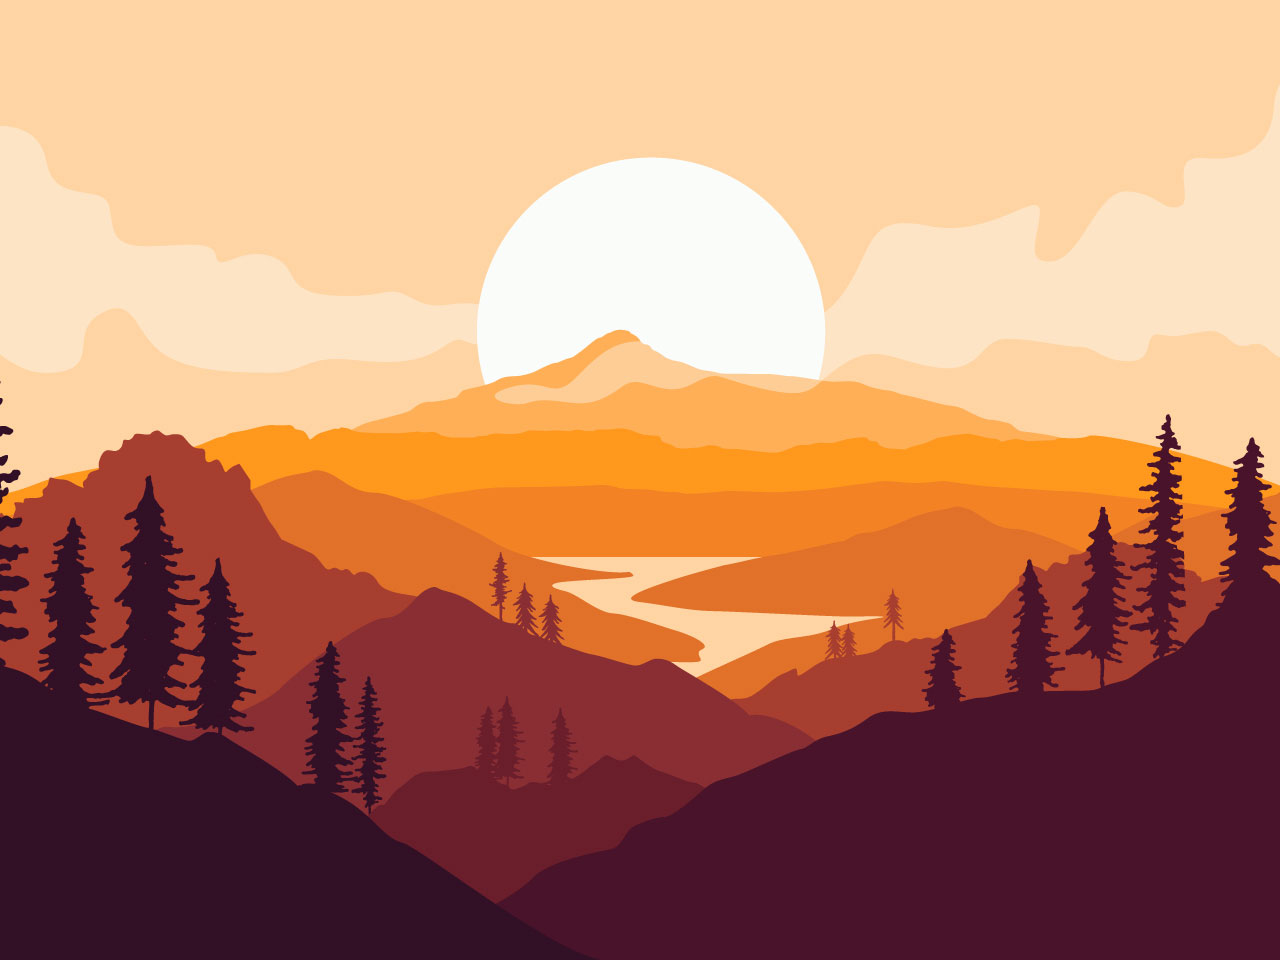 Mountains landscape with tree silhouettes river sunset